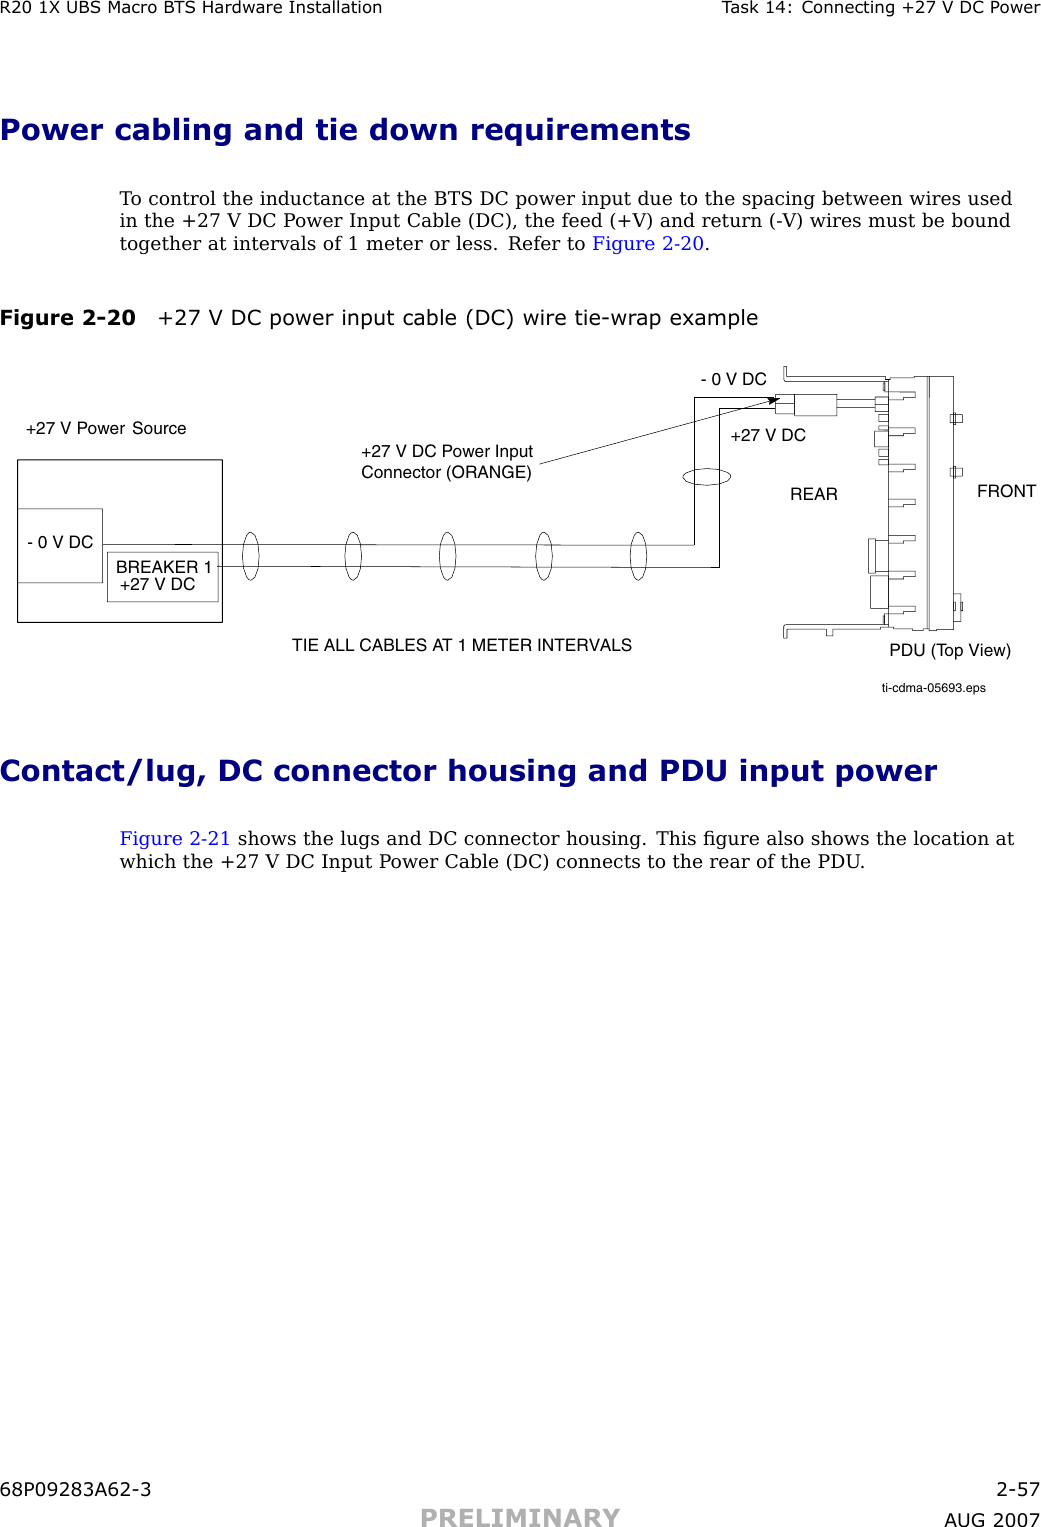 R20 1X UBS Macro B T S Hardw are Installation T ask 14: Connecting +27 V DC P owerPower cabling and tie down requirementsT o control the inductance at the BTS DC power input due to the spacing between wires usedin the +27 V DC P ower Input Cable (DC), the feed (+V) and return ( -V) wires must be boundtogether at intervals of 1 meter or less. Refer to Figure 2 -20 .Figure 2 -20 +27 V DC power input cable (DC) wire tie -wr ap exampleti-cdma-05693.epsTIE ALL CABLES AT 1 METER INTERVALS+27 V Power SourceBREAKER 1+27 V DCPDU (Top View)FRONTREAR+27 V DC- 0 V DC+27 V DC Power Input Connector (ORANGE)- 0 V DCContact/lug, DC connector housing and PDU input powerFigure 2 -21 shows the lugs and DC connector housing. This ﬁgure also shows the location atwhich the +27 V DC Input P ower Cable (DC) connects to the rear of the PDU .68P09283A62 -3 2 -57PRELIMINARY A UG 2007